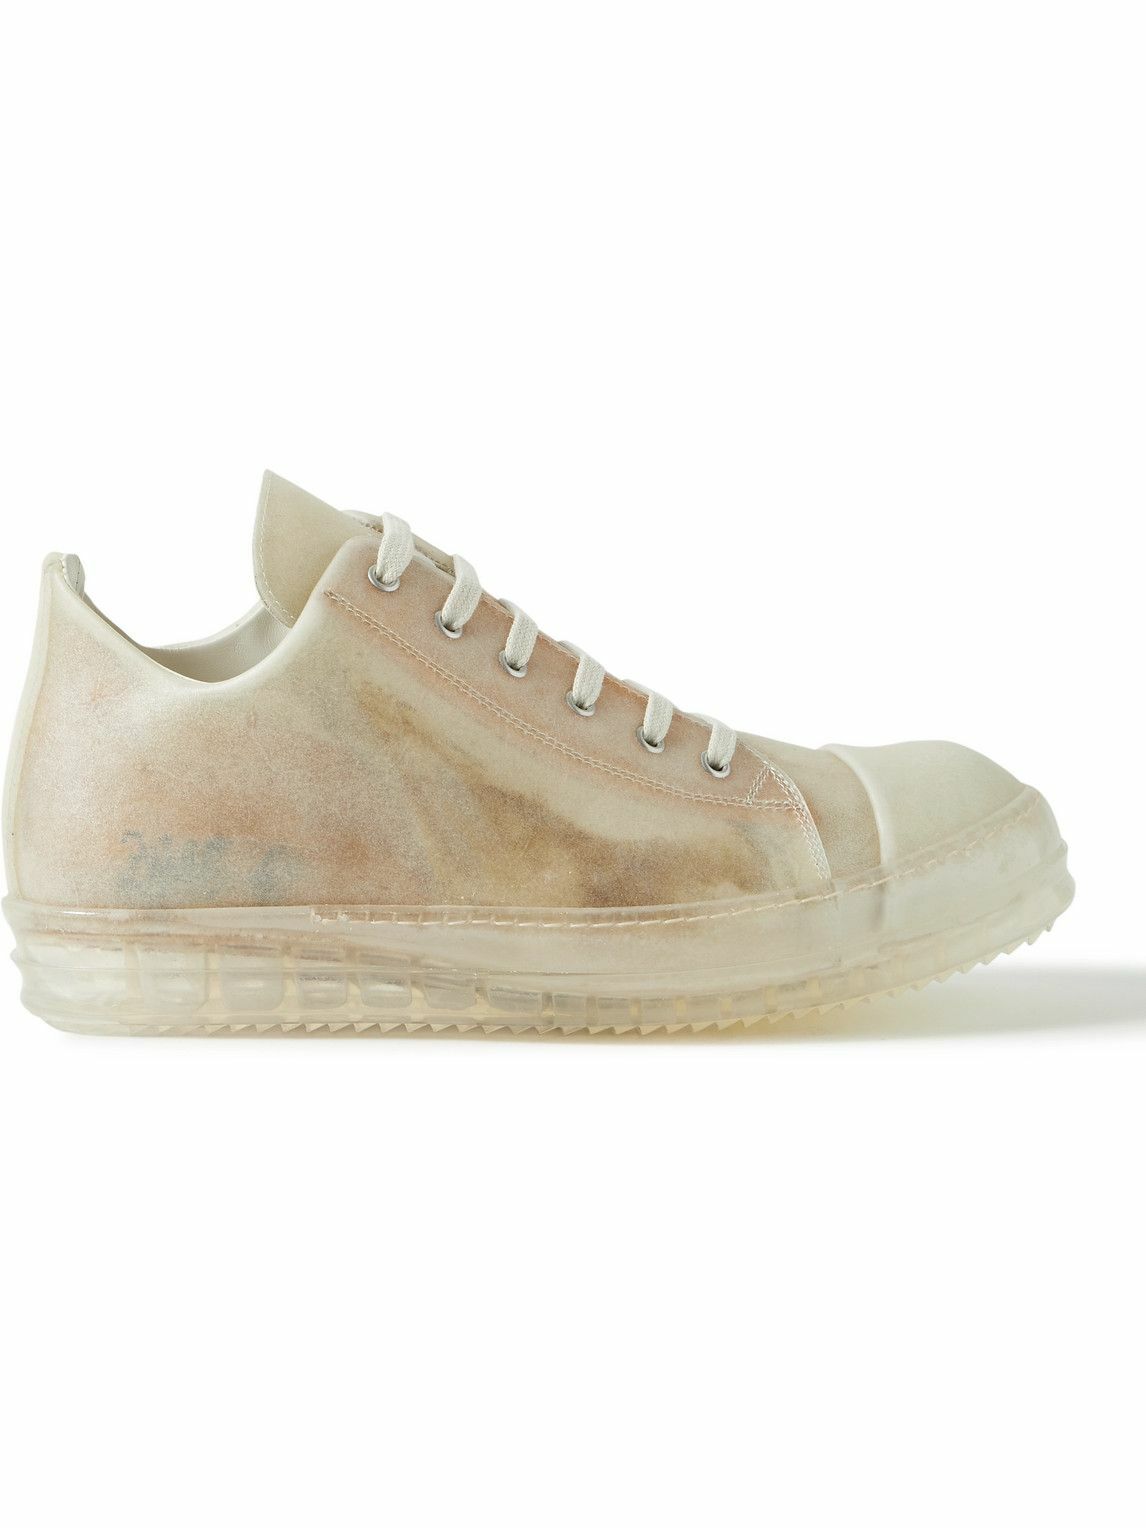 Rick Owens - Leather-Trimmed Rubber Sneakers - Neutrals